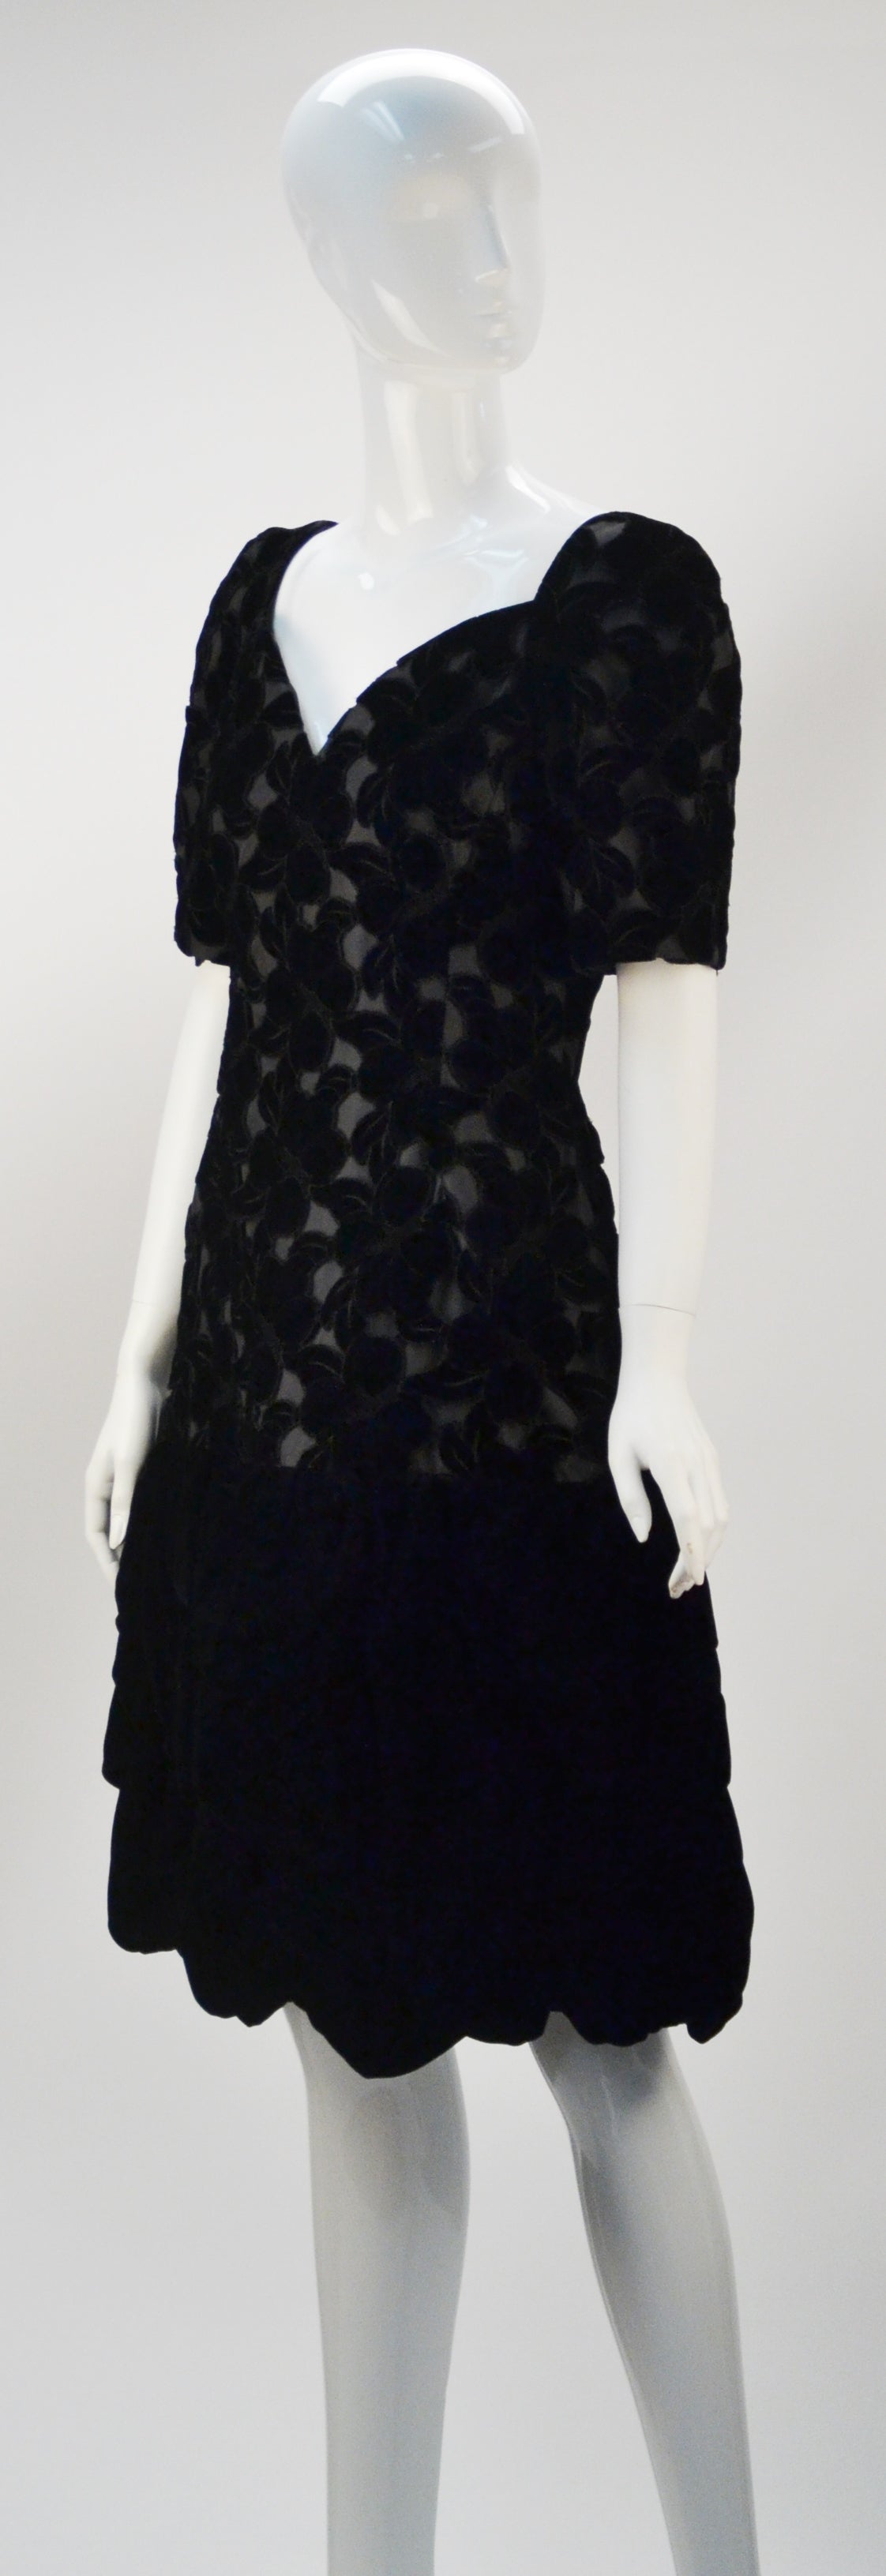 Gorgeous 1990's Scaasi black laser cut velvet floral print cocktail dress with short sleeves. The bodice has a sweetheart necklace and hidden boning to the true waist. The laser cut bodice creates a drop waist silhouette, while the velvet skirt is